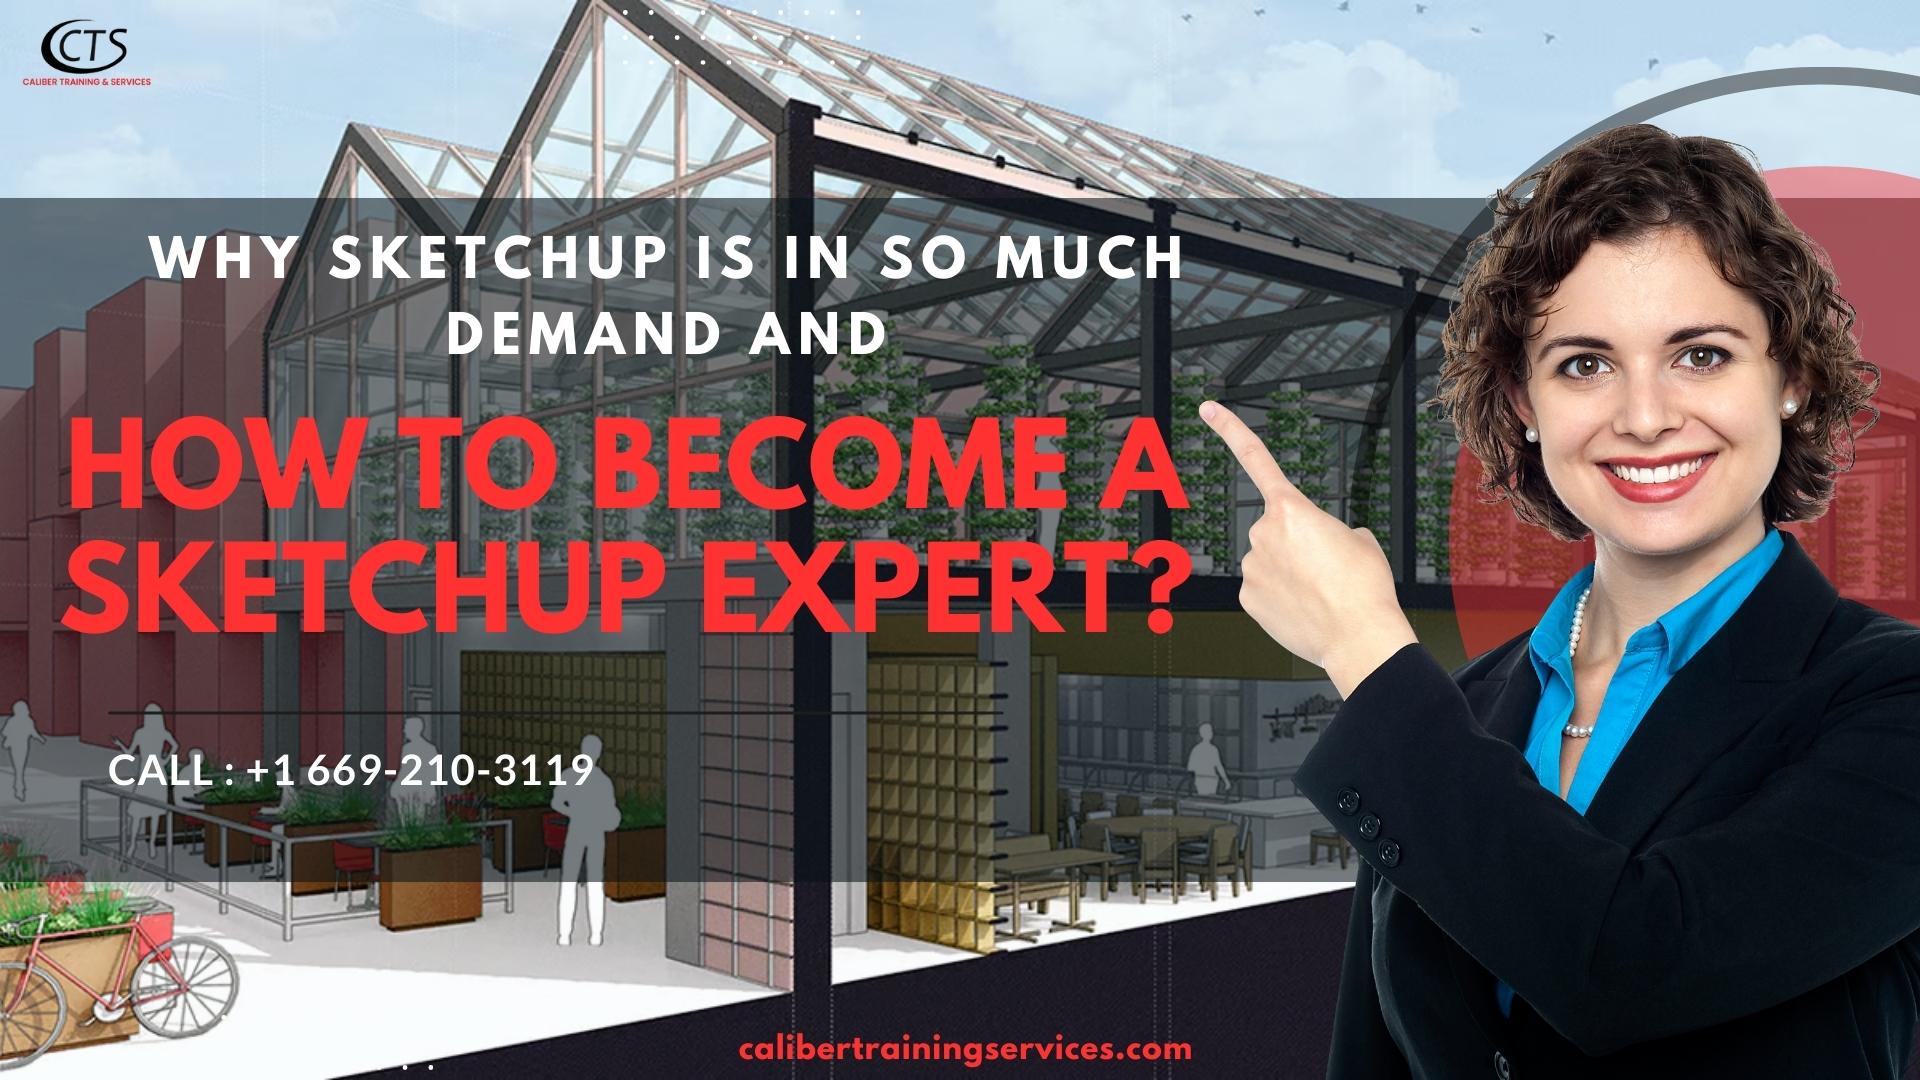 SketchUp Online Training Course Near Me